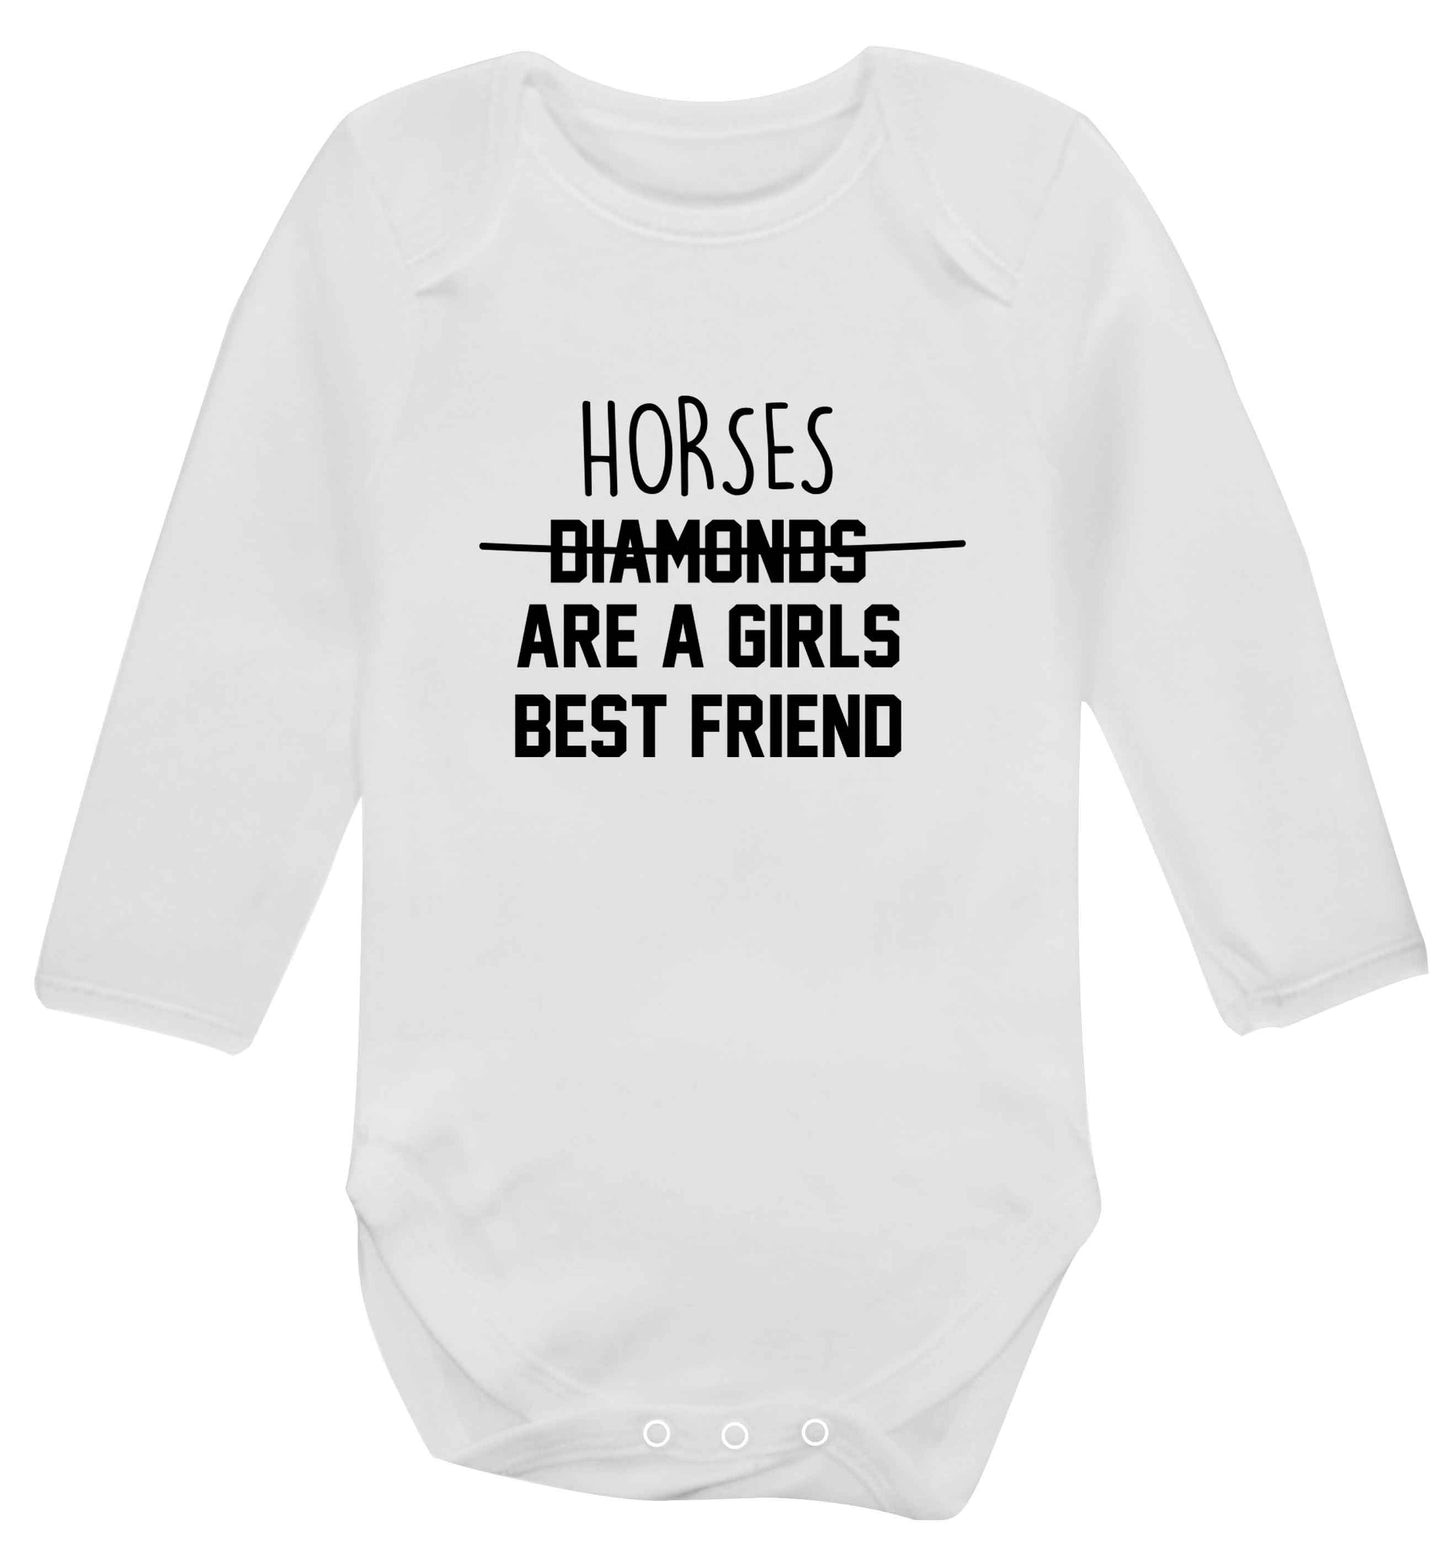 Horses are a girls best friend baby vest long sleeved white 6-12 months